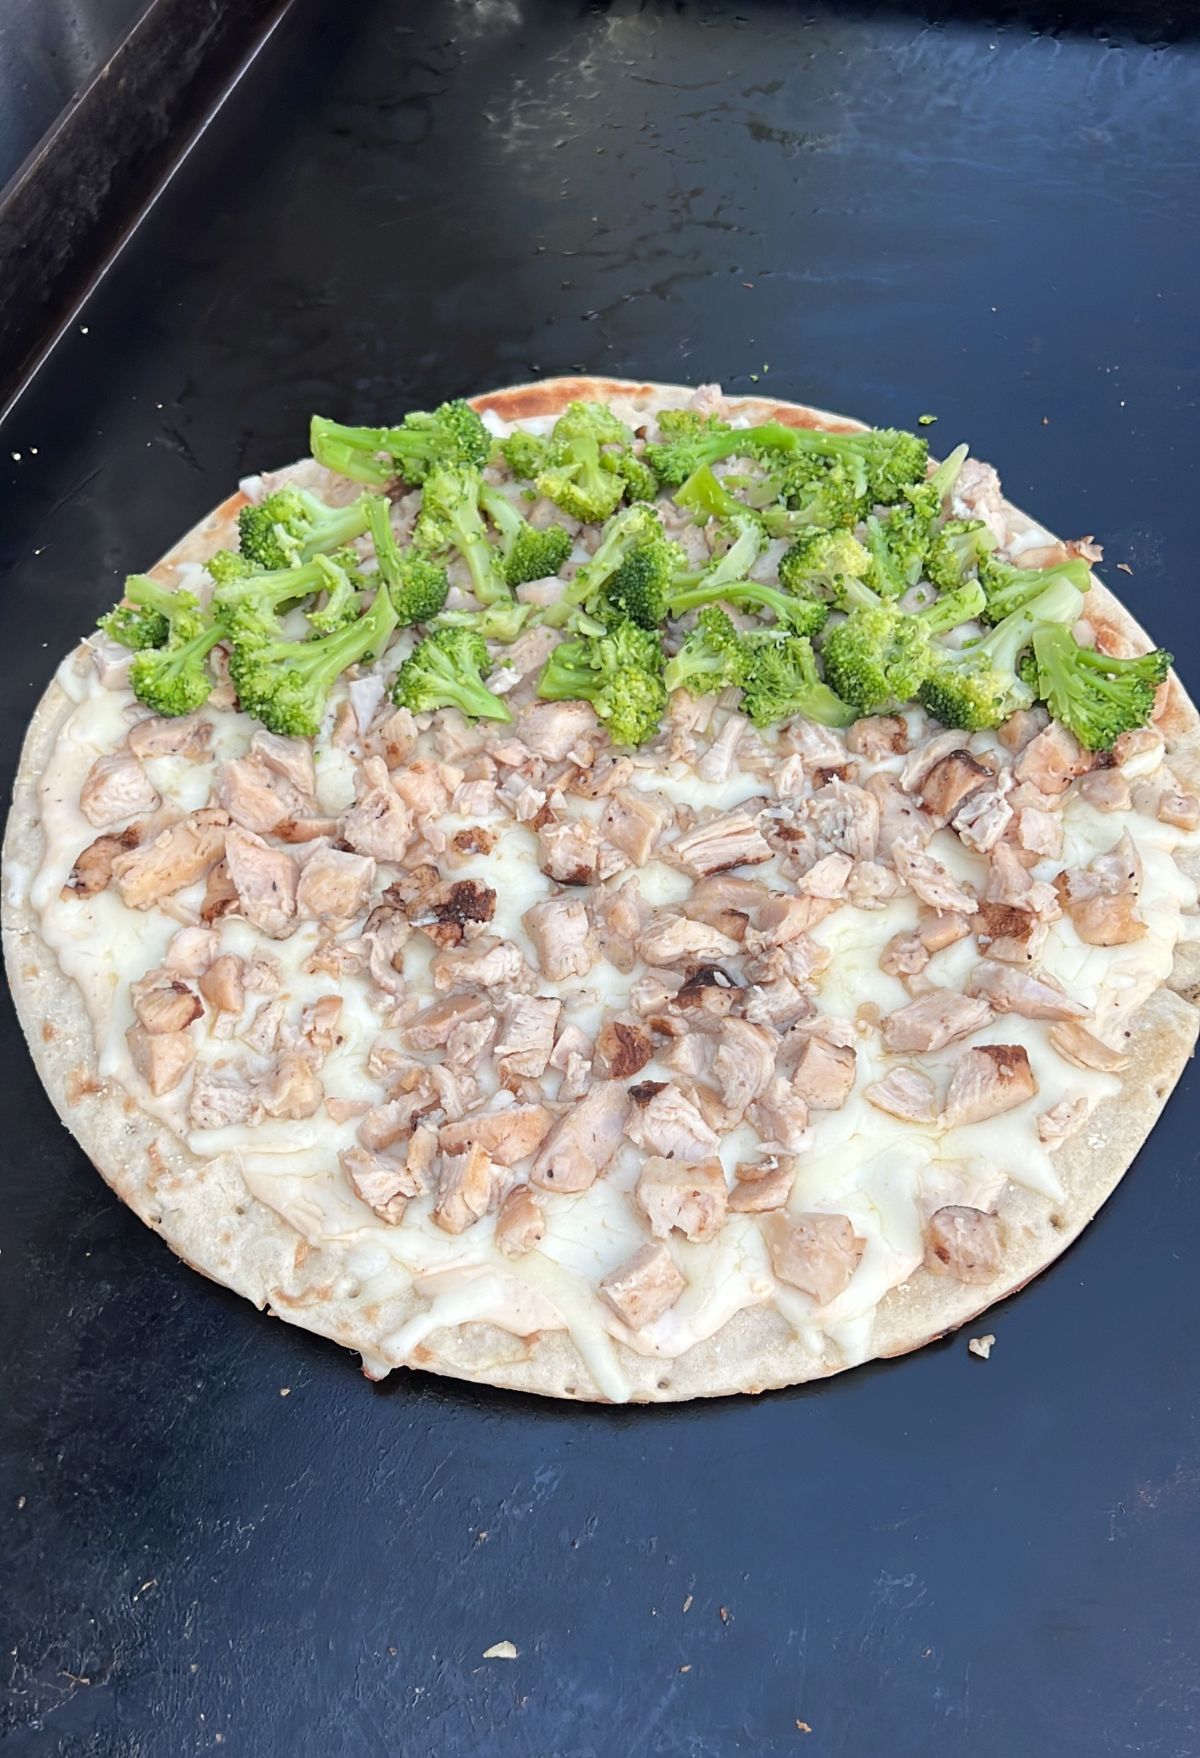 A pizza with chicken and broccoli on it.